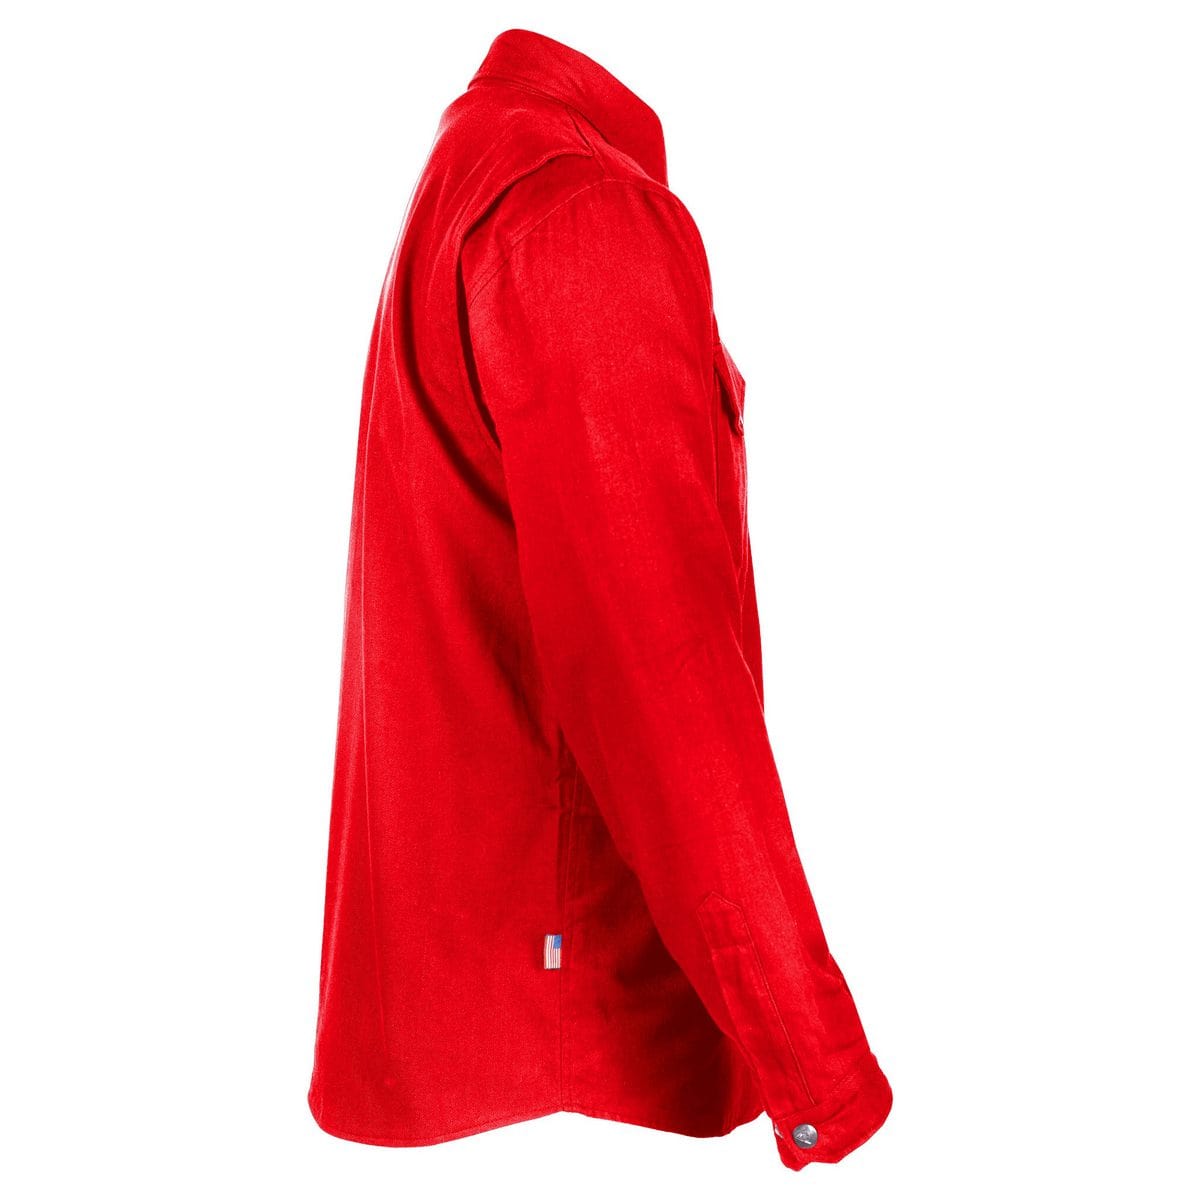 SALE Protective Flannel Shirt - Red Solid with Pads